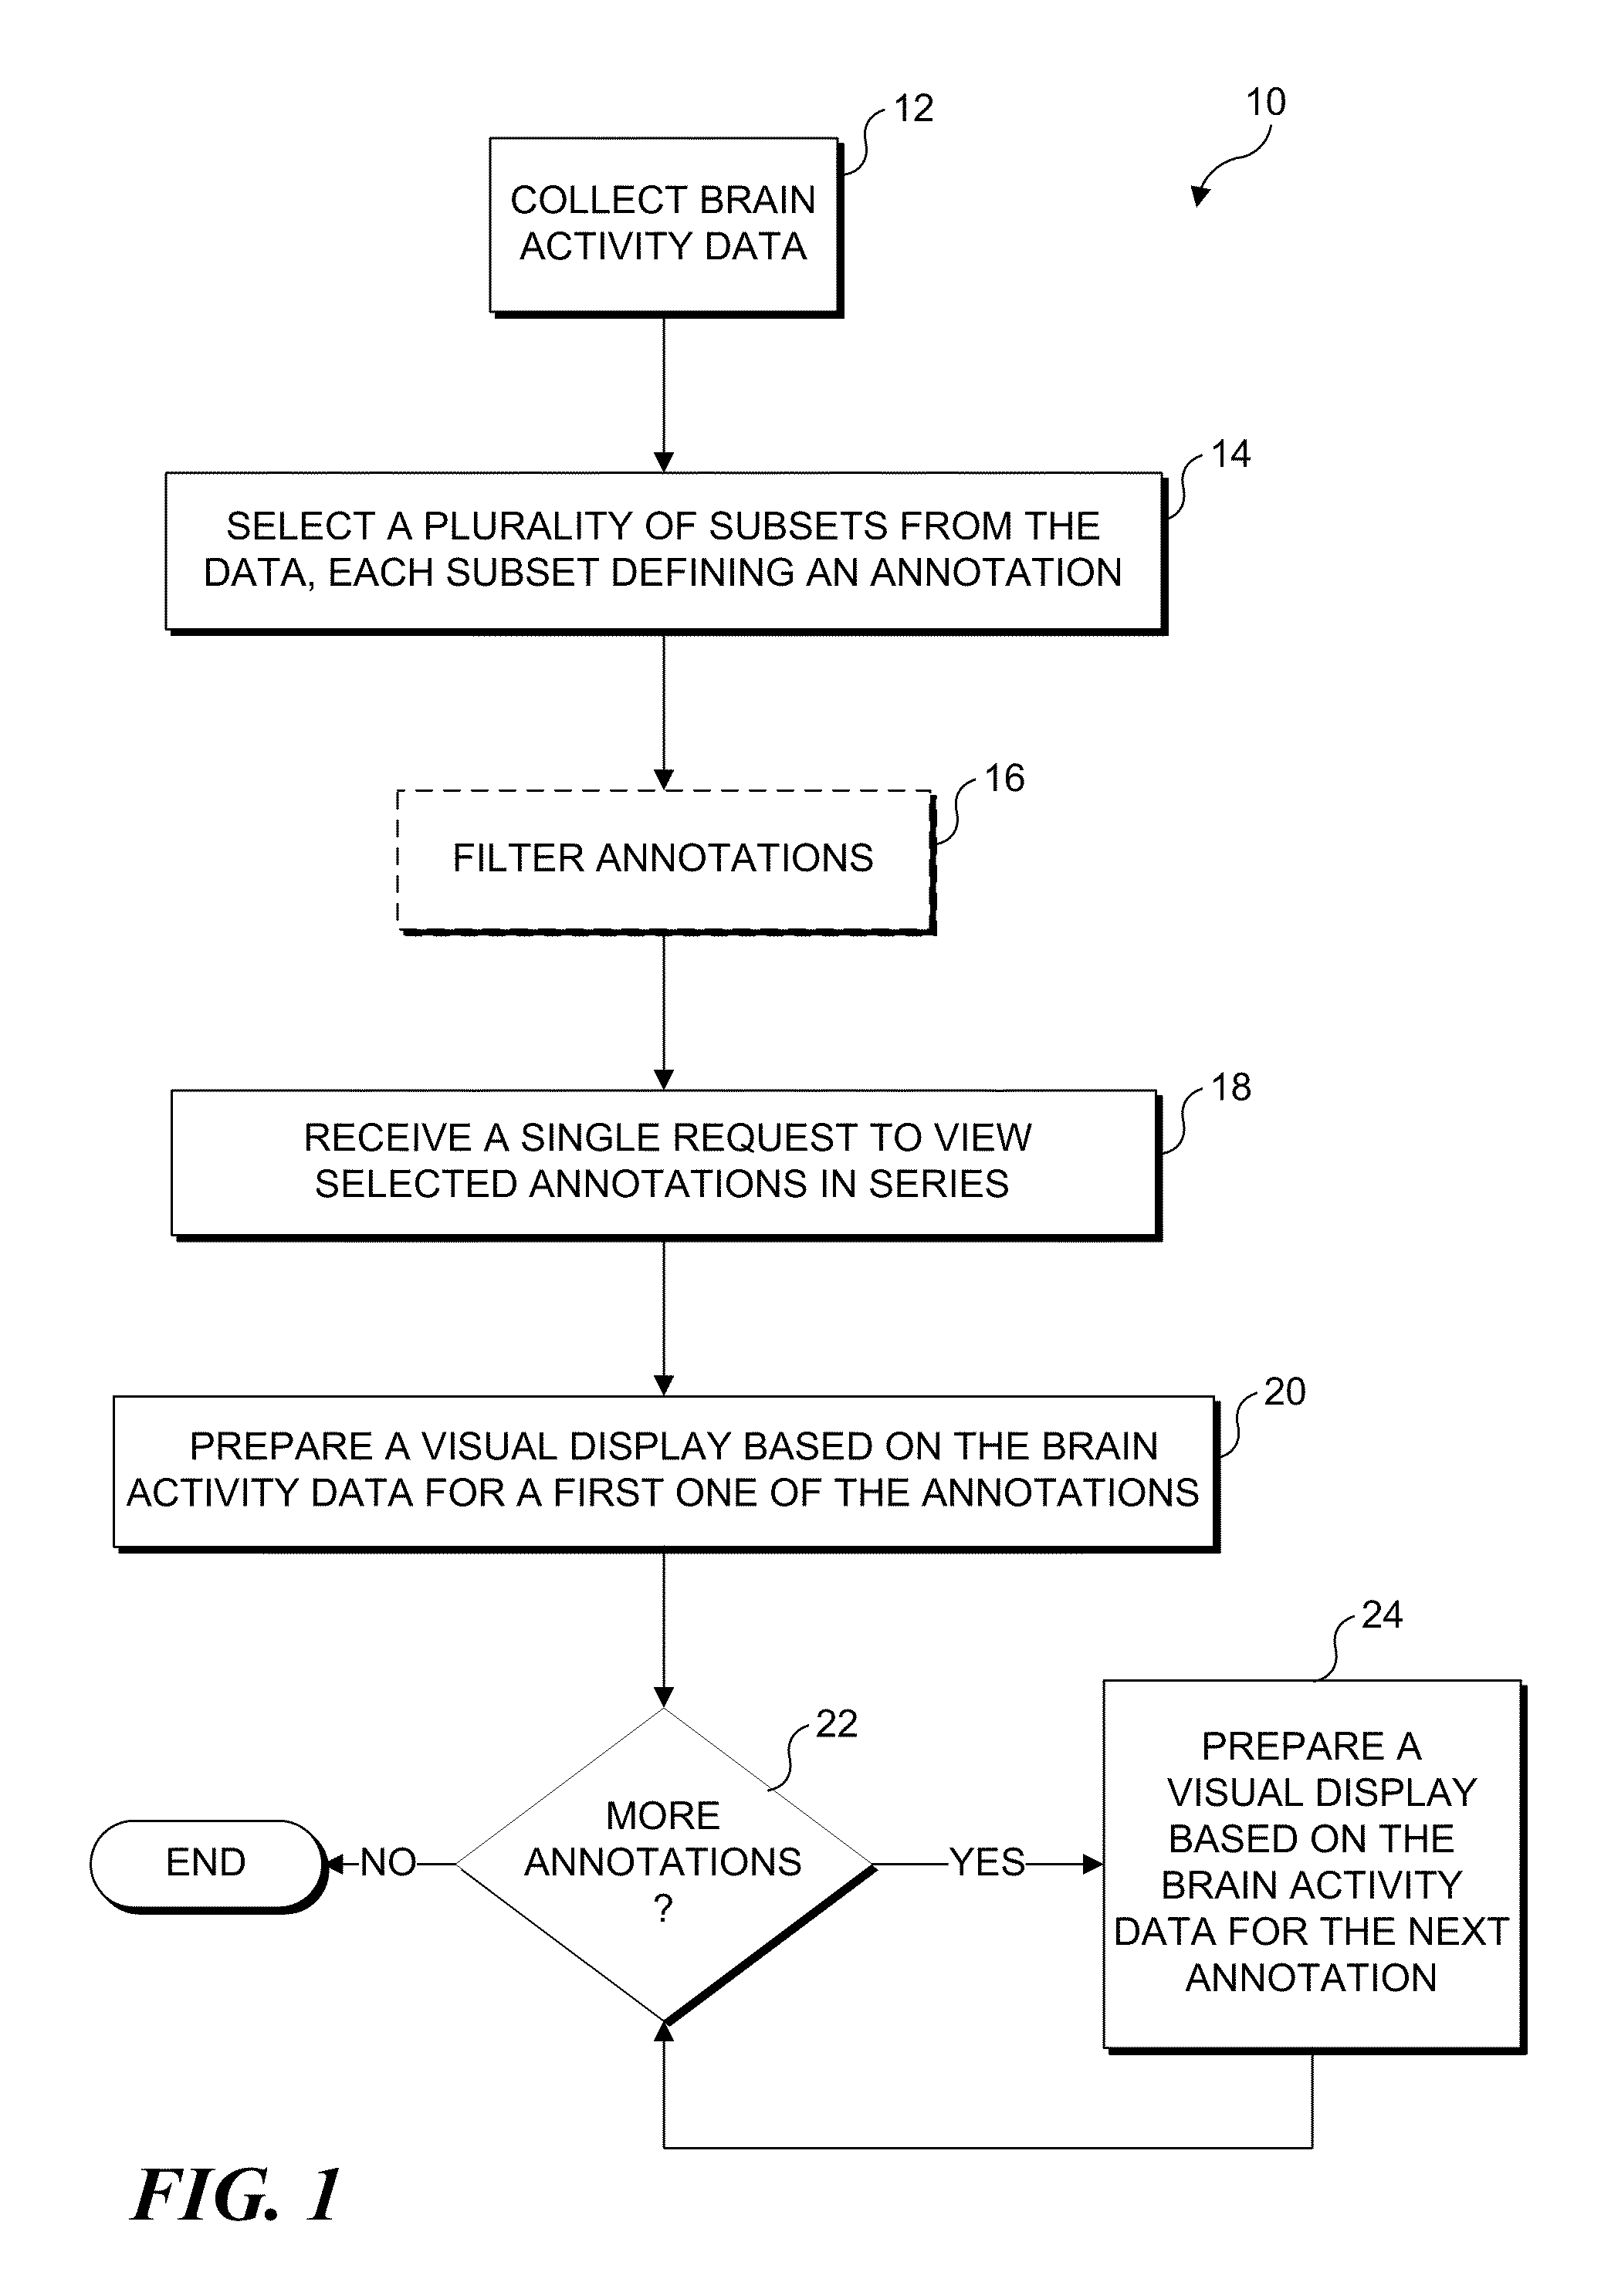 Displaying and Manipulating Brain Function Data Including Enhanced Data Scrolling Functionality